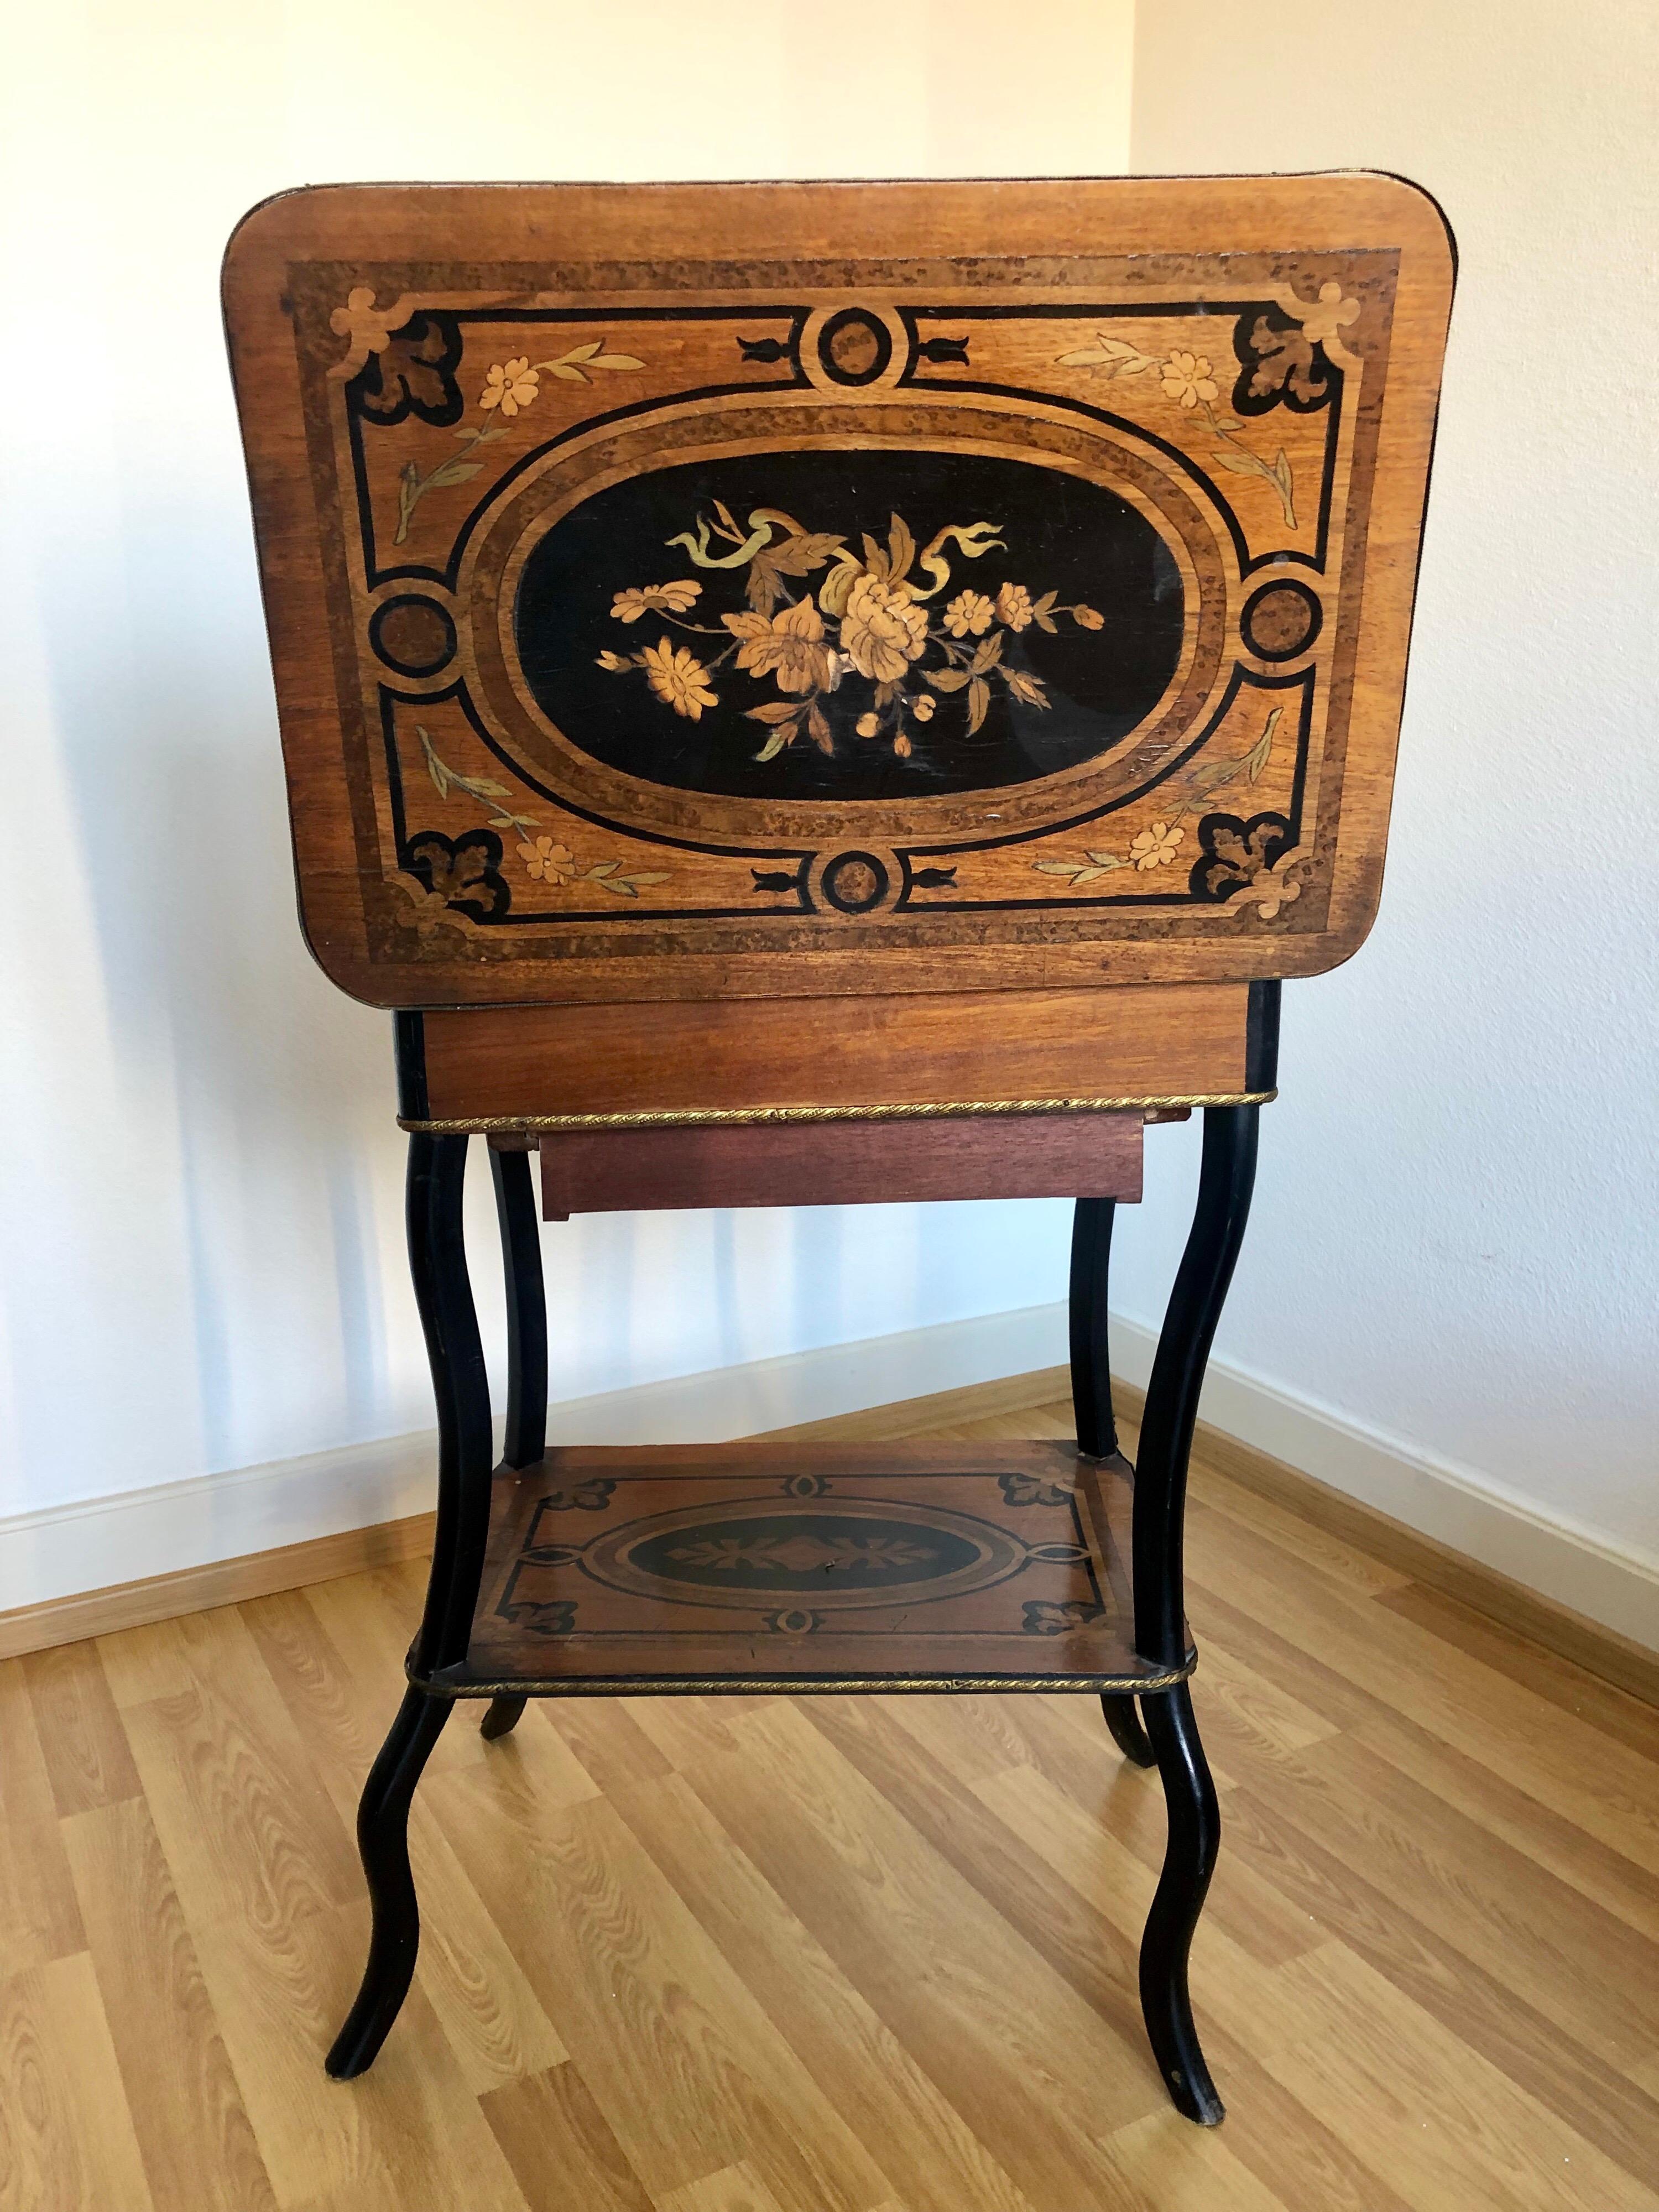 Lovely petite early 20th century vanity make up table that needs some light restoration. 


The furniture of the Louis XV period (1715-1774) is characterized by curved forms, lightness, comfort and asymmetry; it replaced the more formal, boxlike